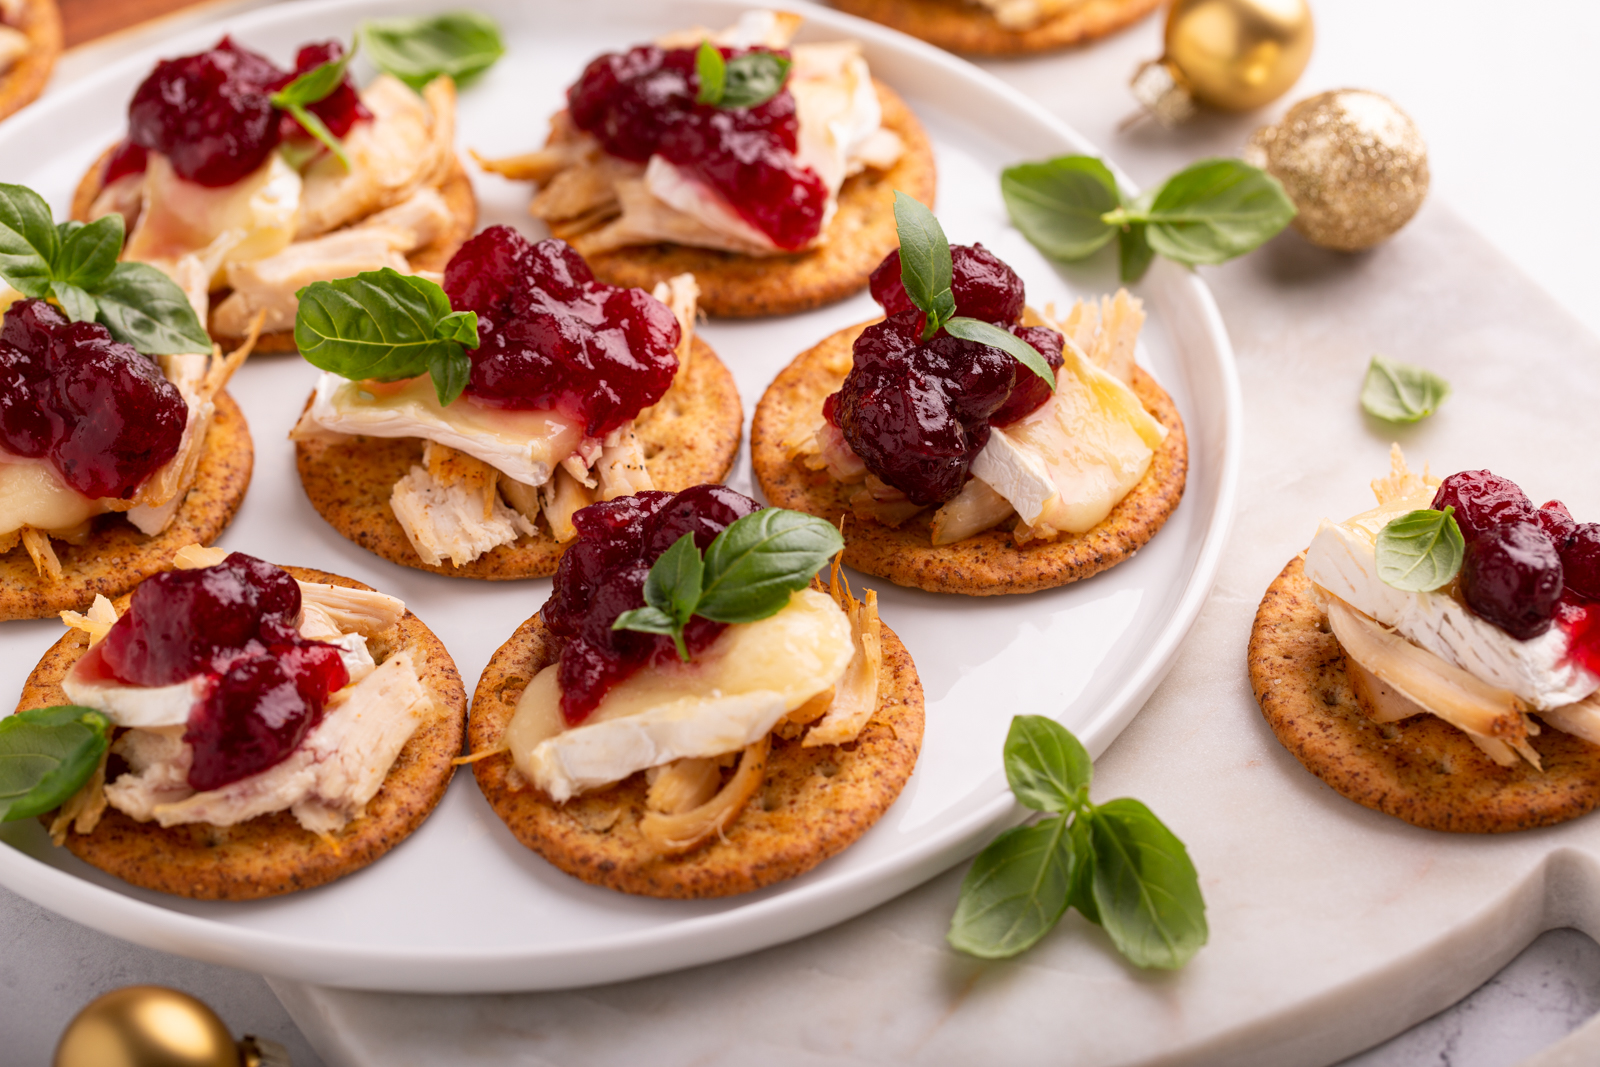 Recipe: Festive Holiday Appetizer | Cranberry Brie Turkey Crackers